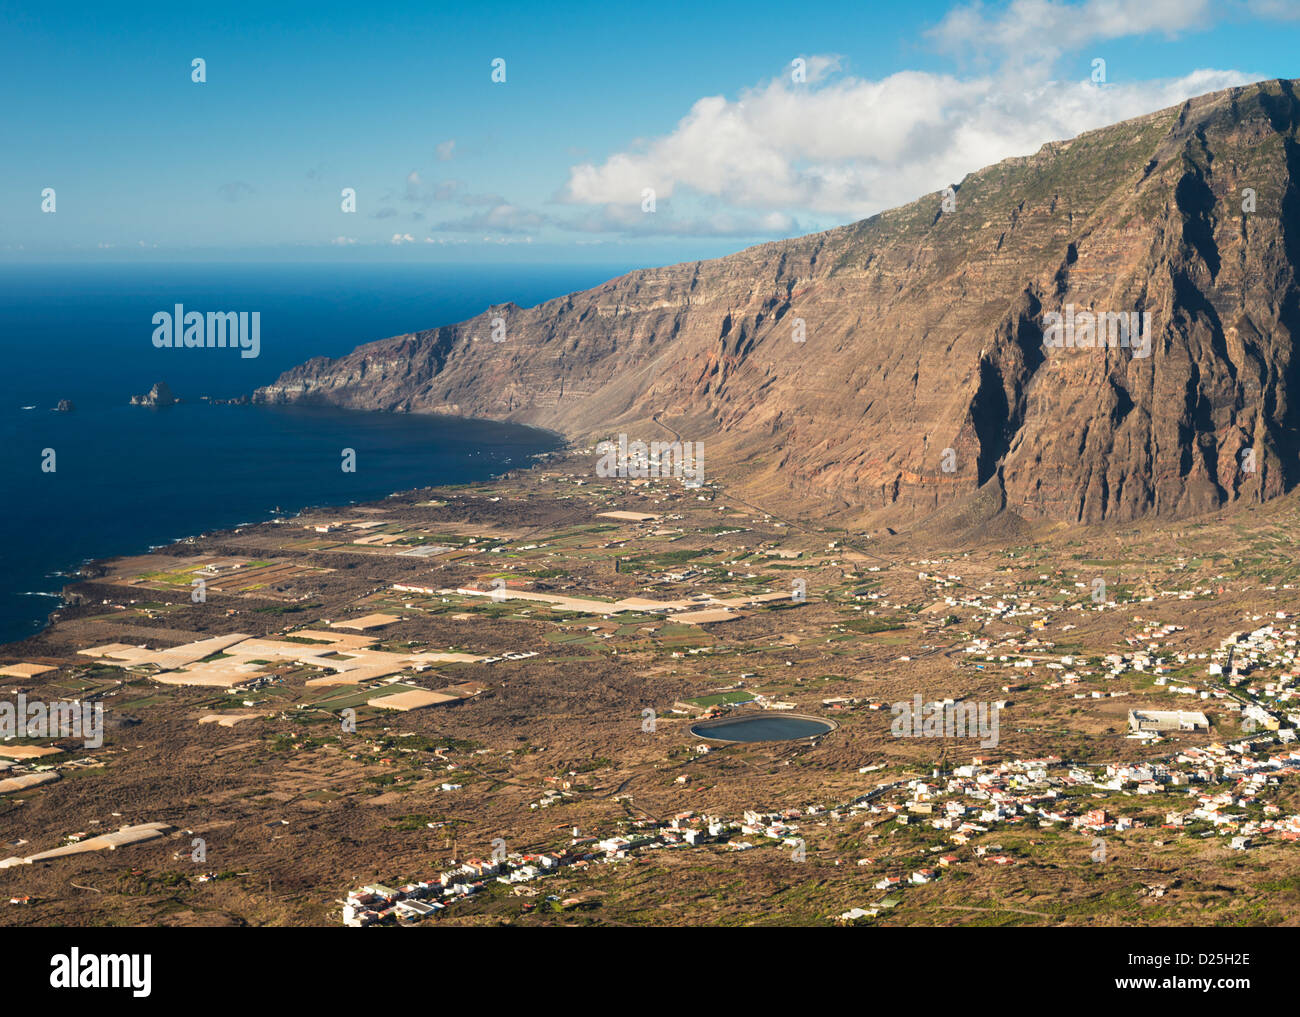 View over the towns of Tigaday and Frontera in the El Golfo embayment, El Hierro, towards the giant cliff of Fuga de Gorreta Stock Photo